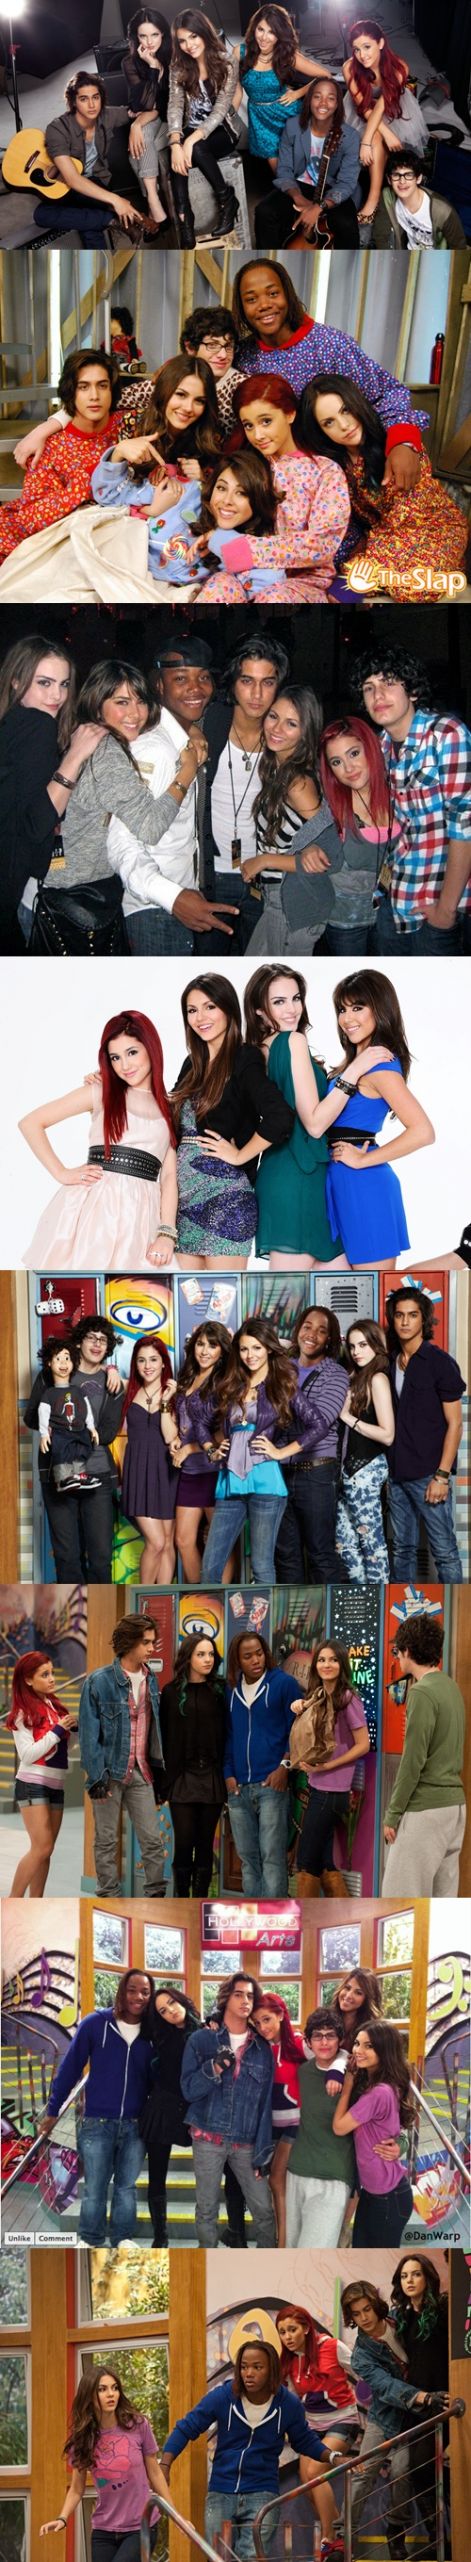 victorious-cast-cd-booklet-pic-victorious-25464441-1429-757-vert.jpg